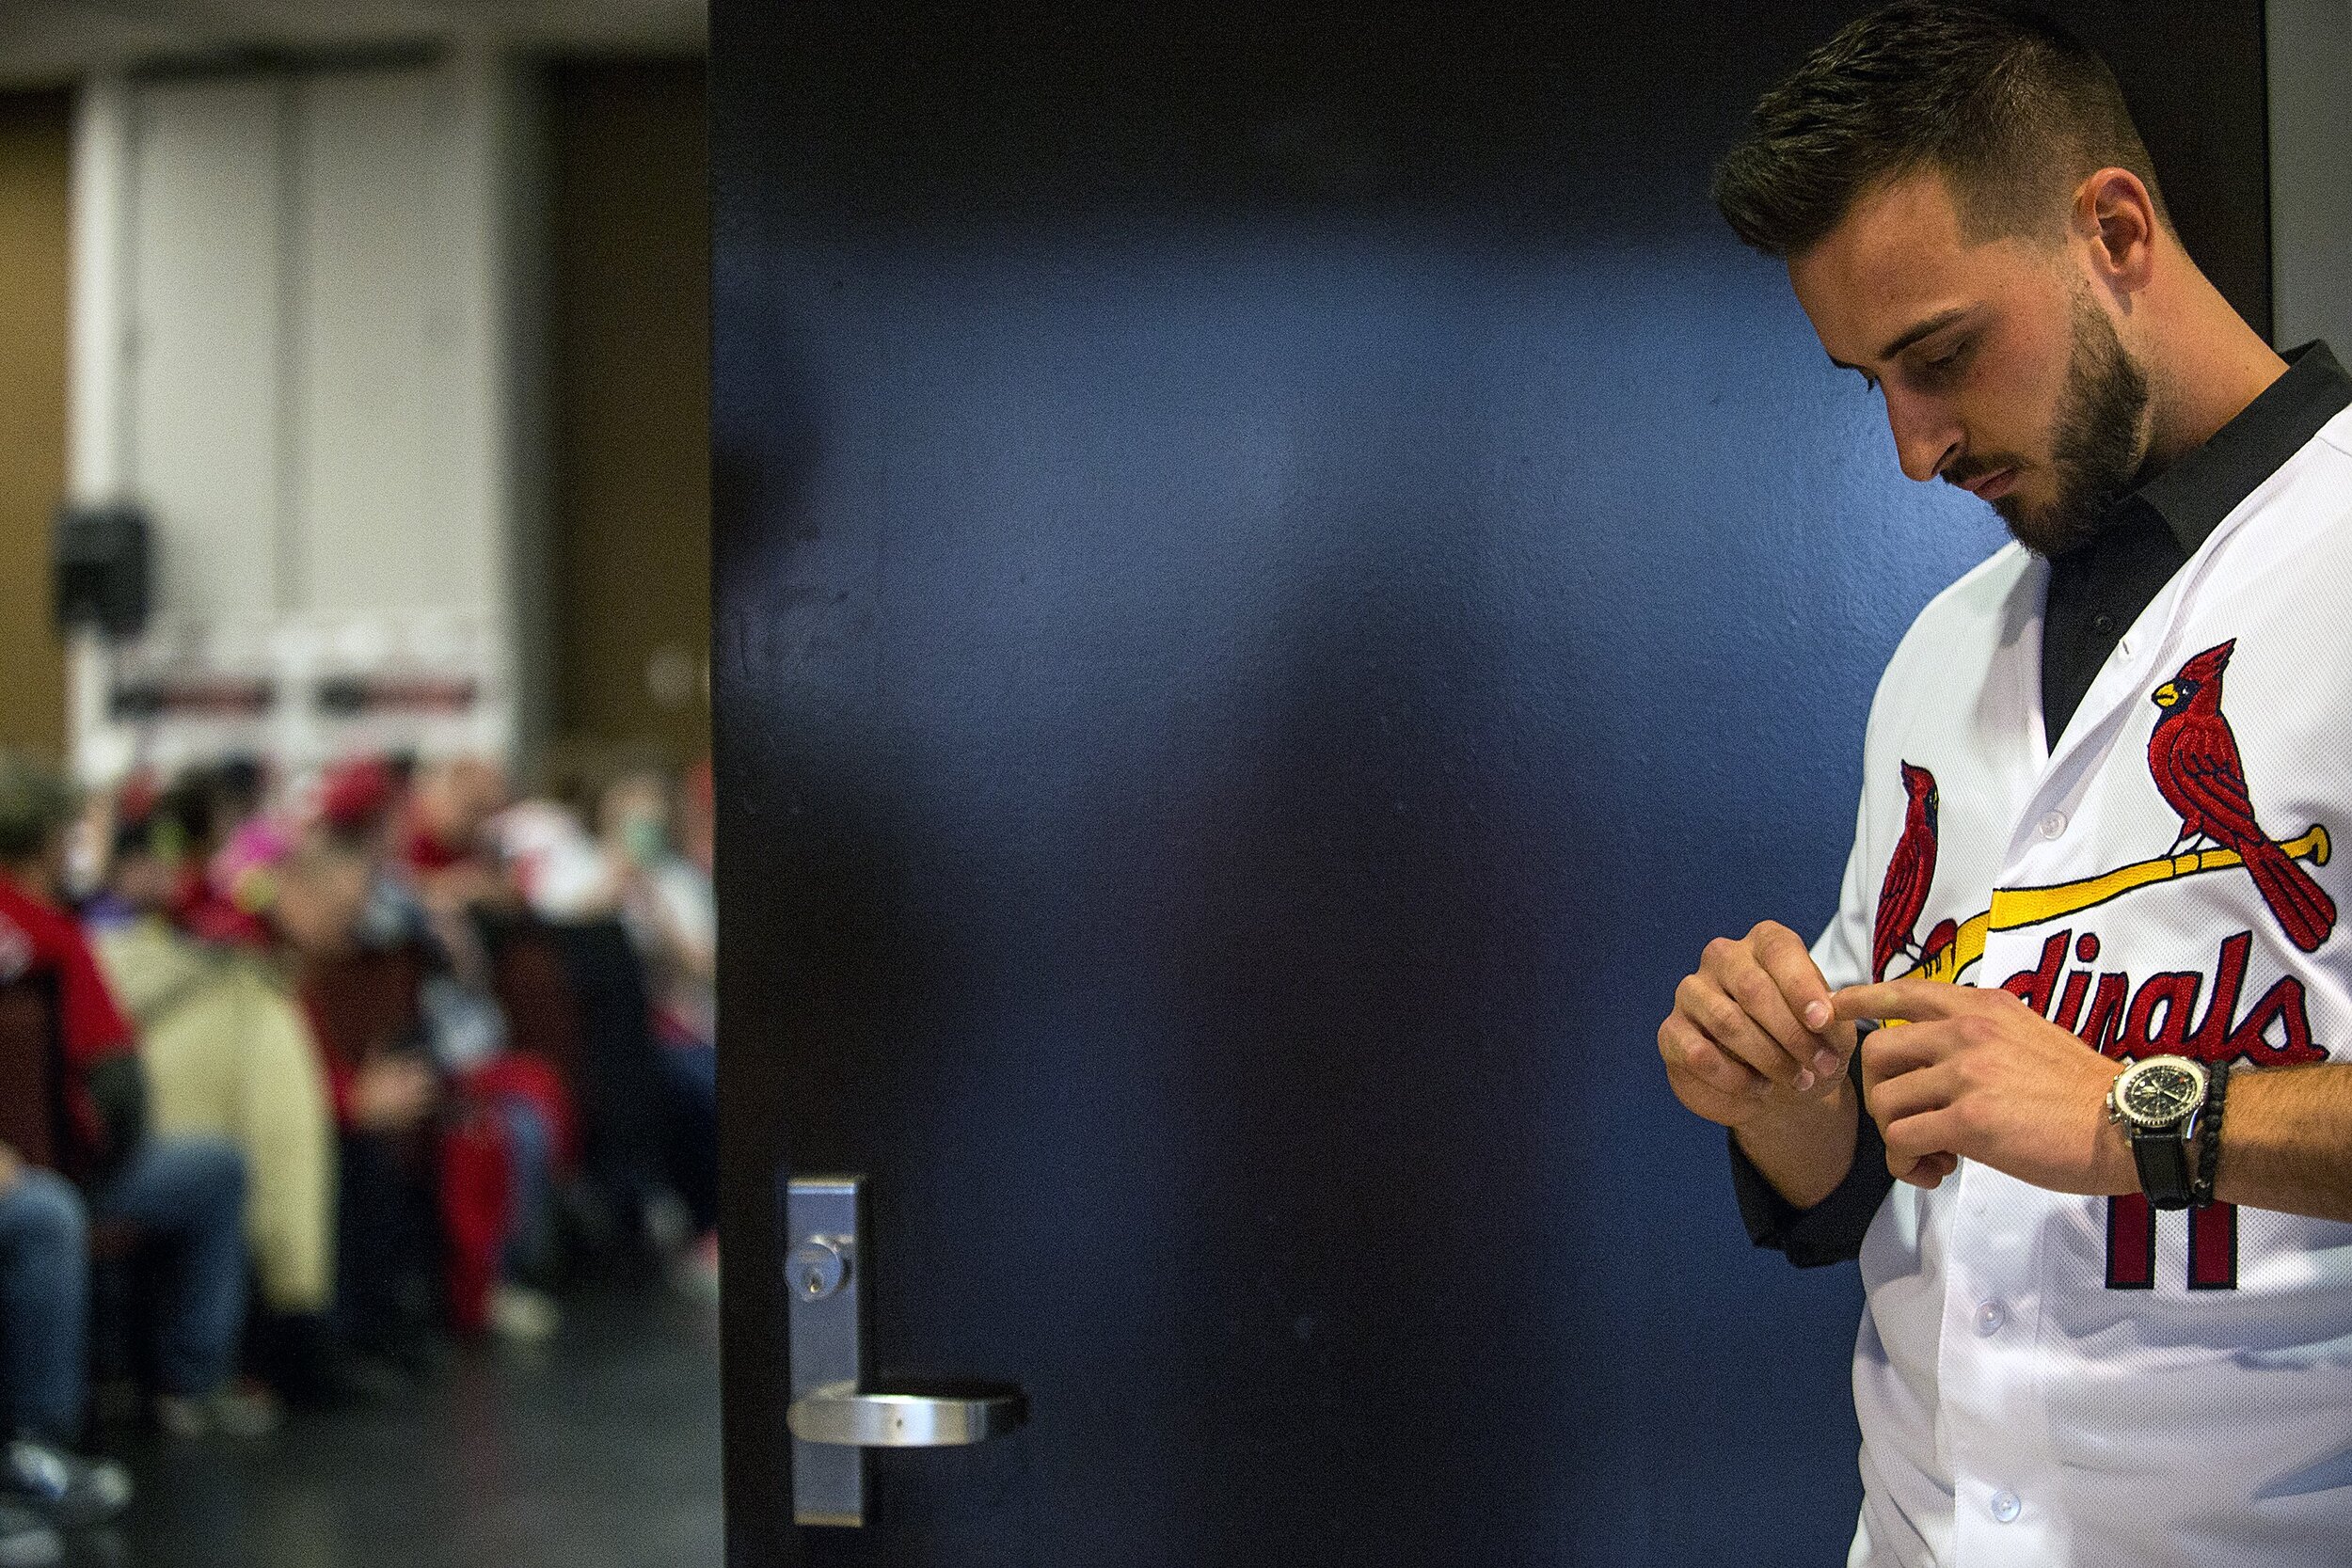  St. Louis Cardinals’ Paul DeJong waits for his announced entrance to enter a room full of fans during the Cardinal Caravan stop Saturday, Jan. 13, 2018, at Parke Regency Hotel and Conference Center in Bloomington, Illinois. DeJong is a former Illino